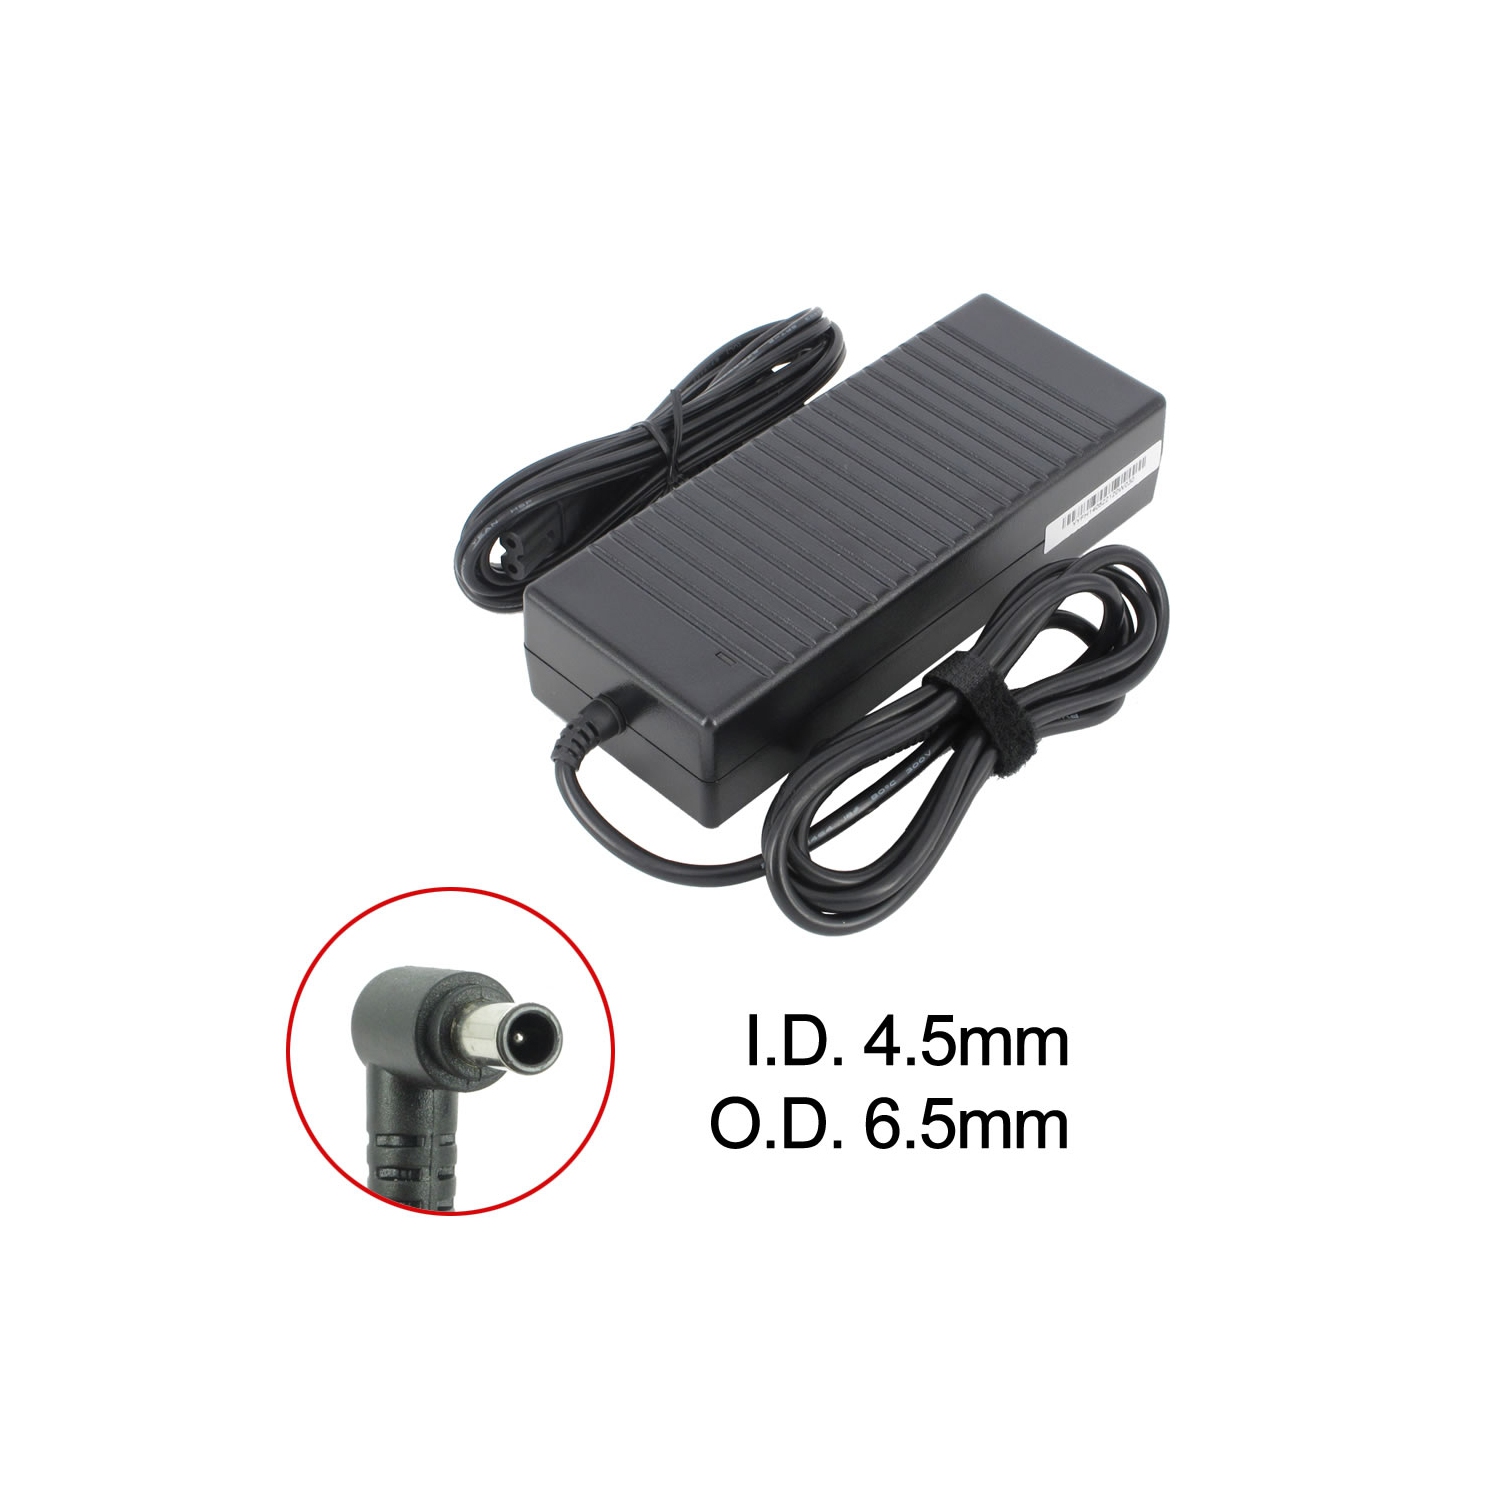 Brand New Laptop AC Adapter for Sony VAIO VGN-AW31XY/Q, PCGA-AC19V15, PCGA-AC19V25, PCGA-AC19V7, VGP-AC19V16